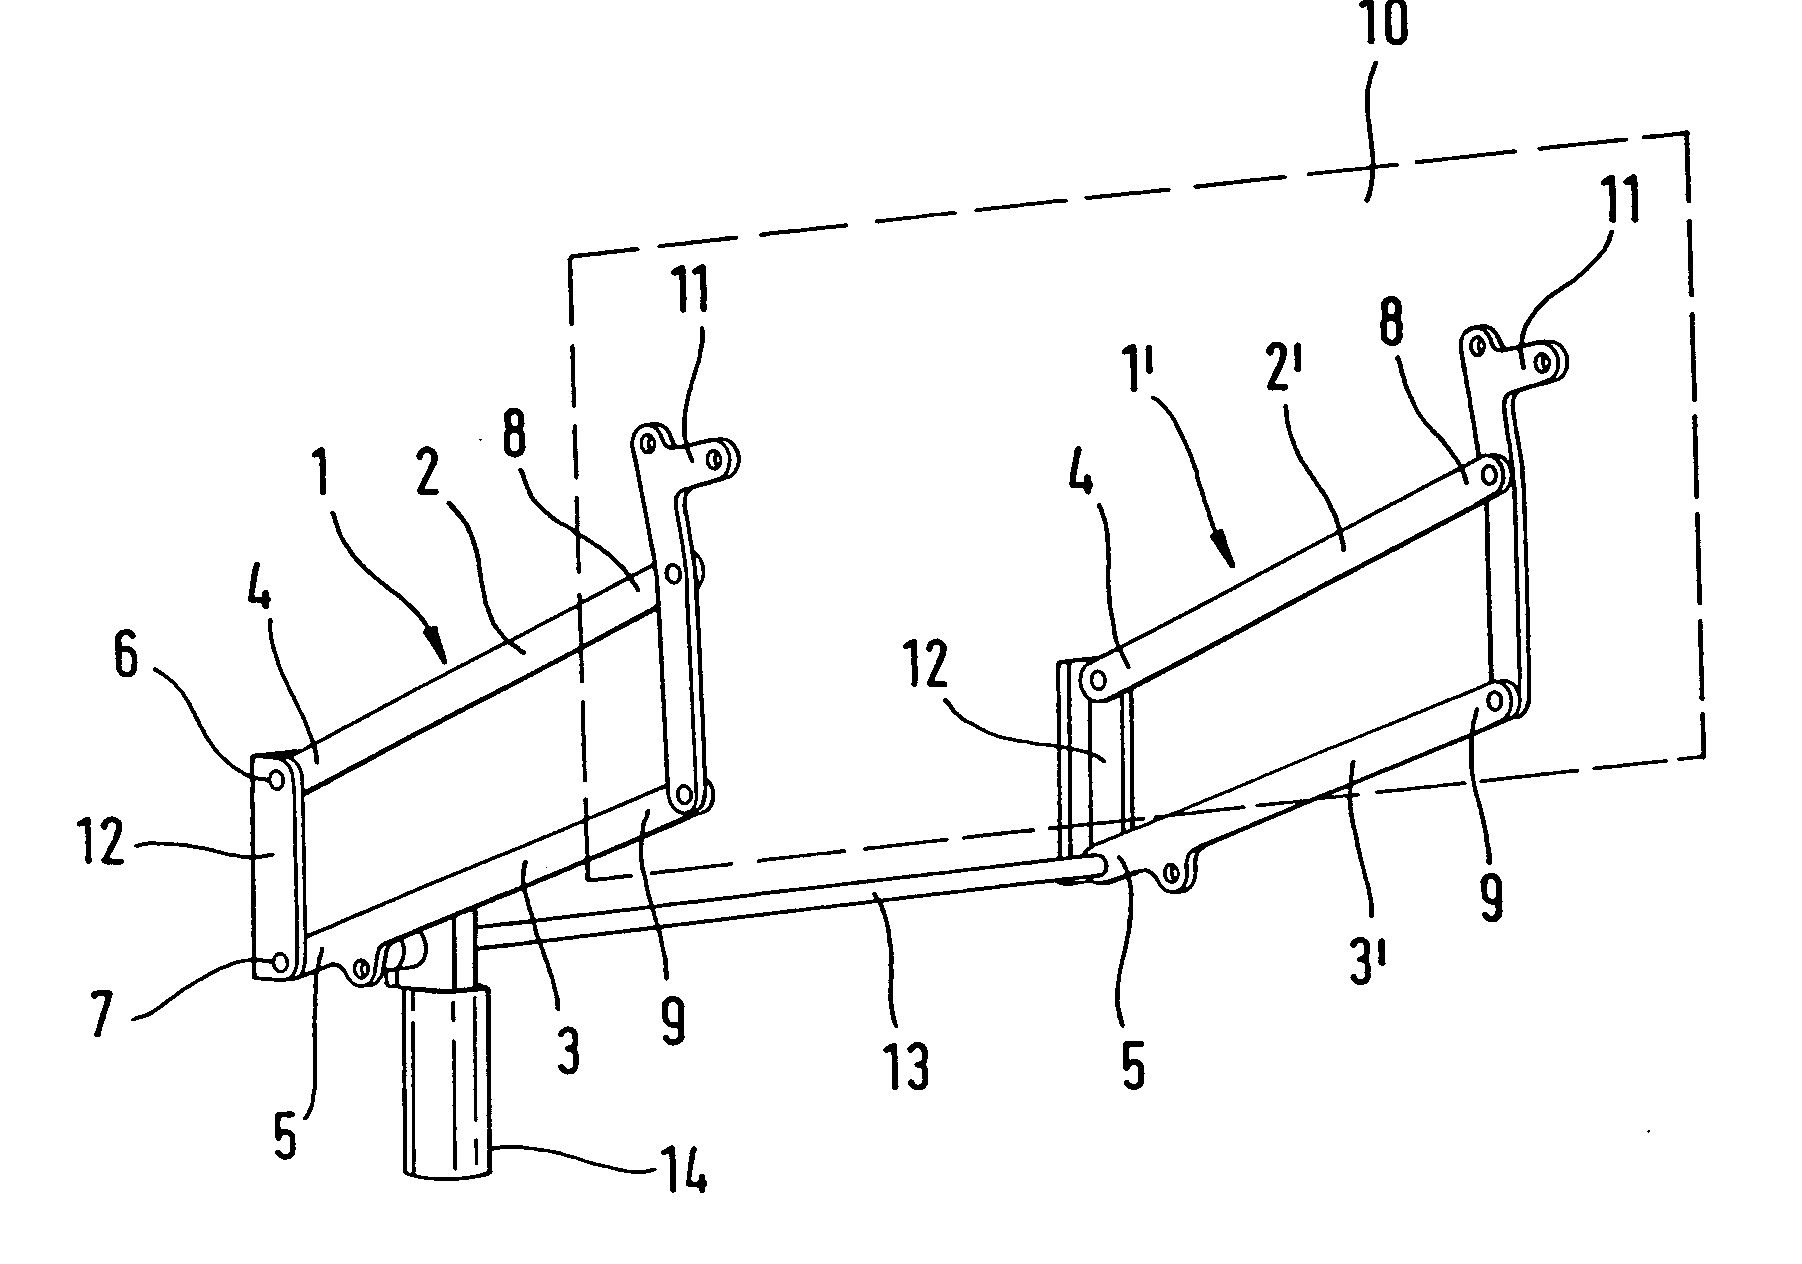 Drive for opening and closing a vehicle flap